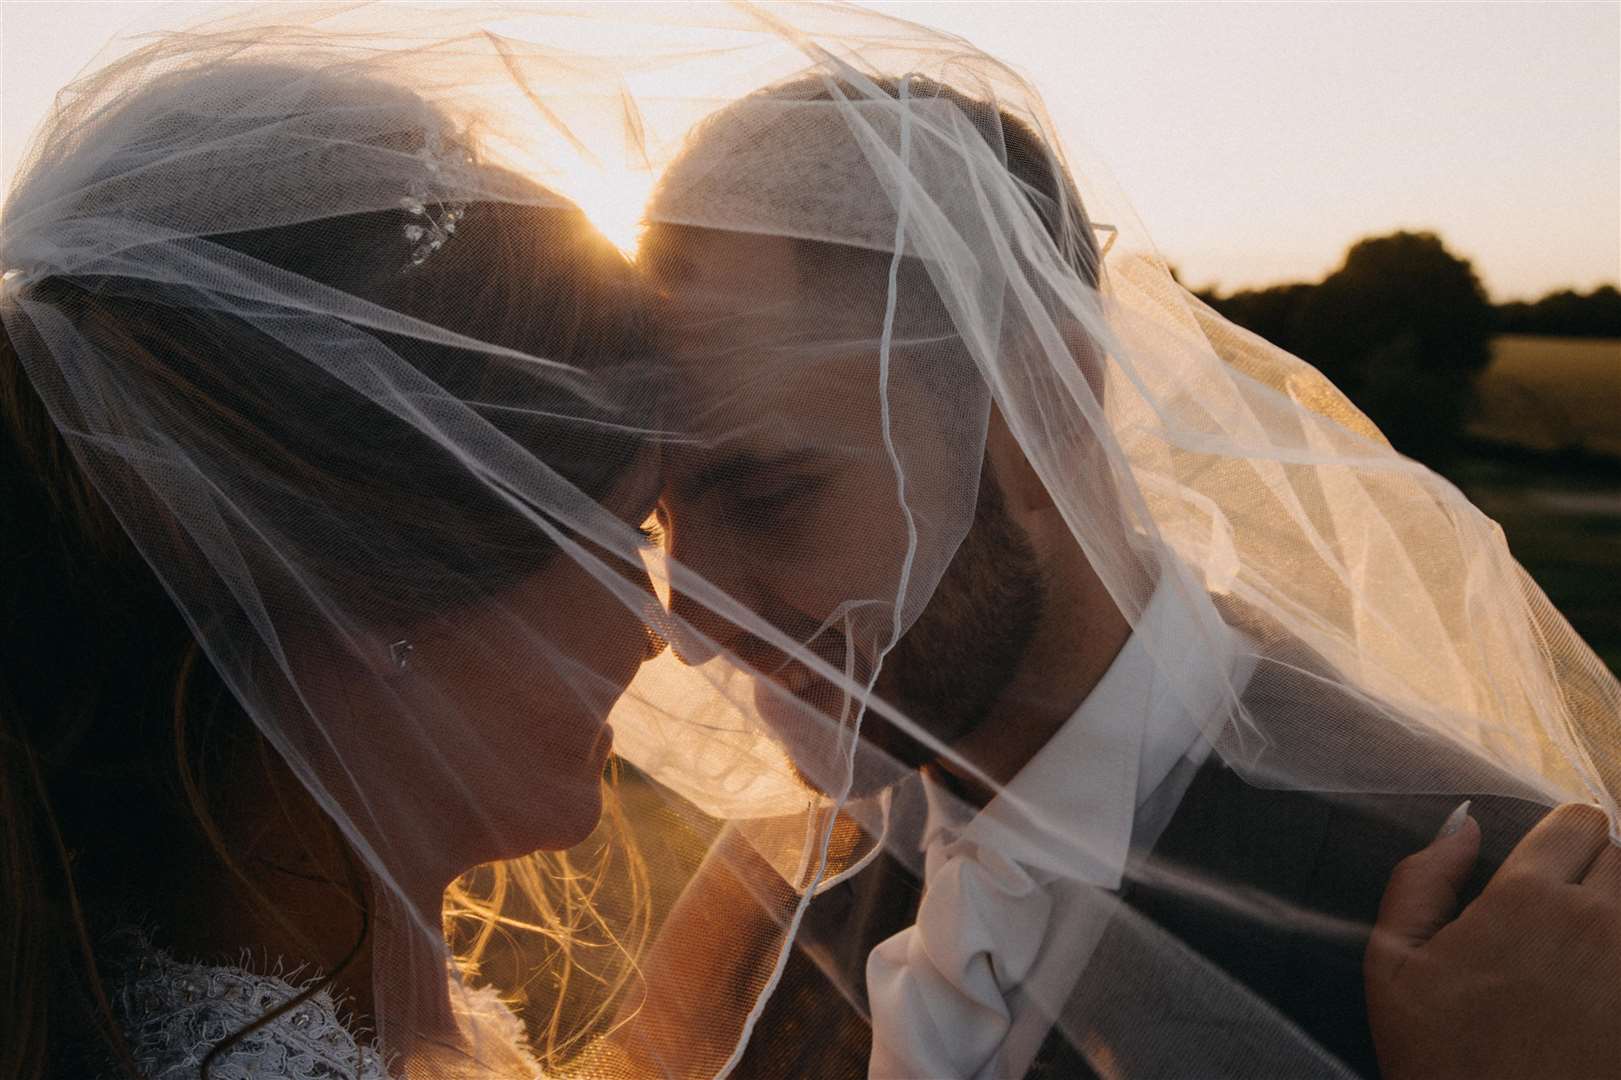 Together forever, Holly and Stan share a moment under the veil